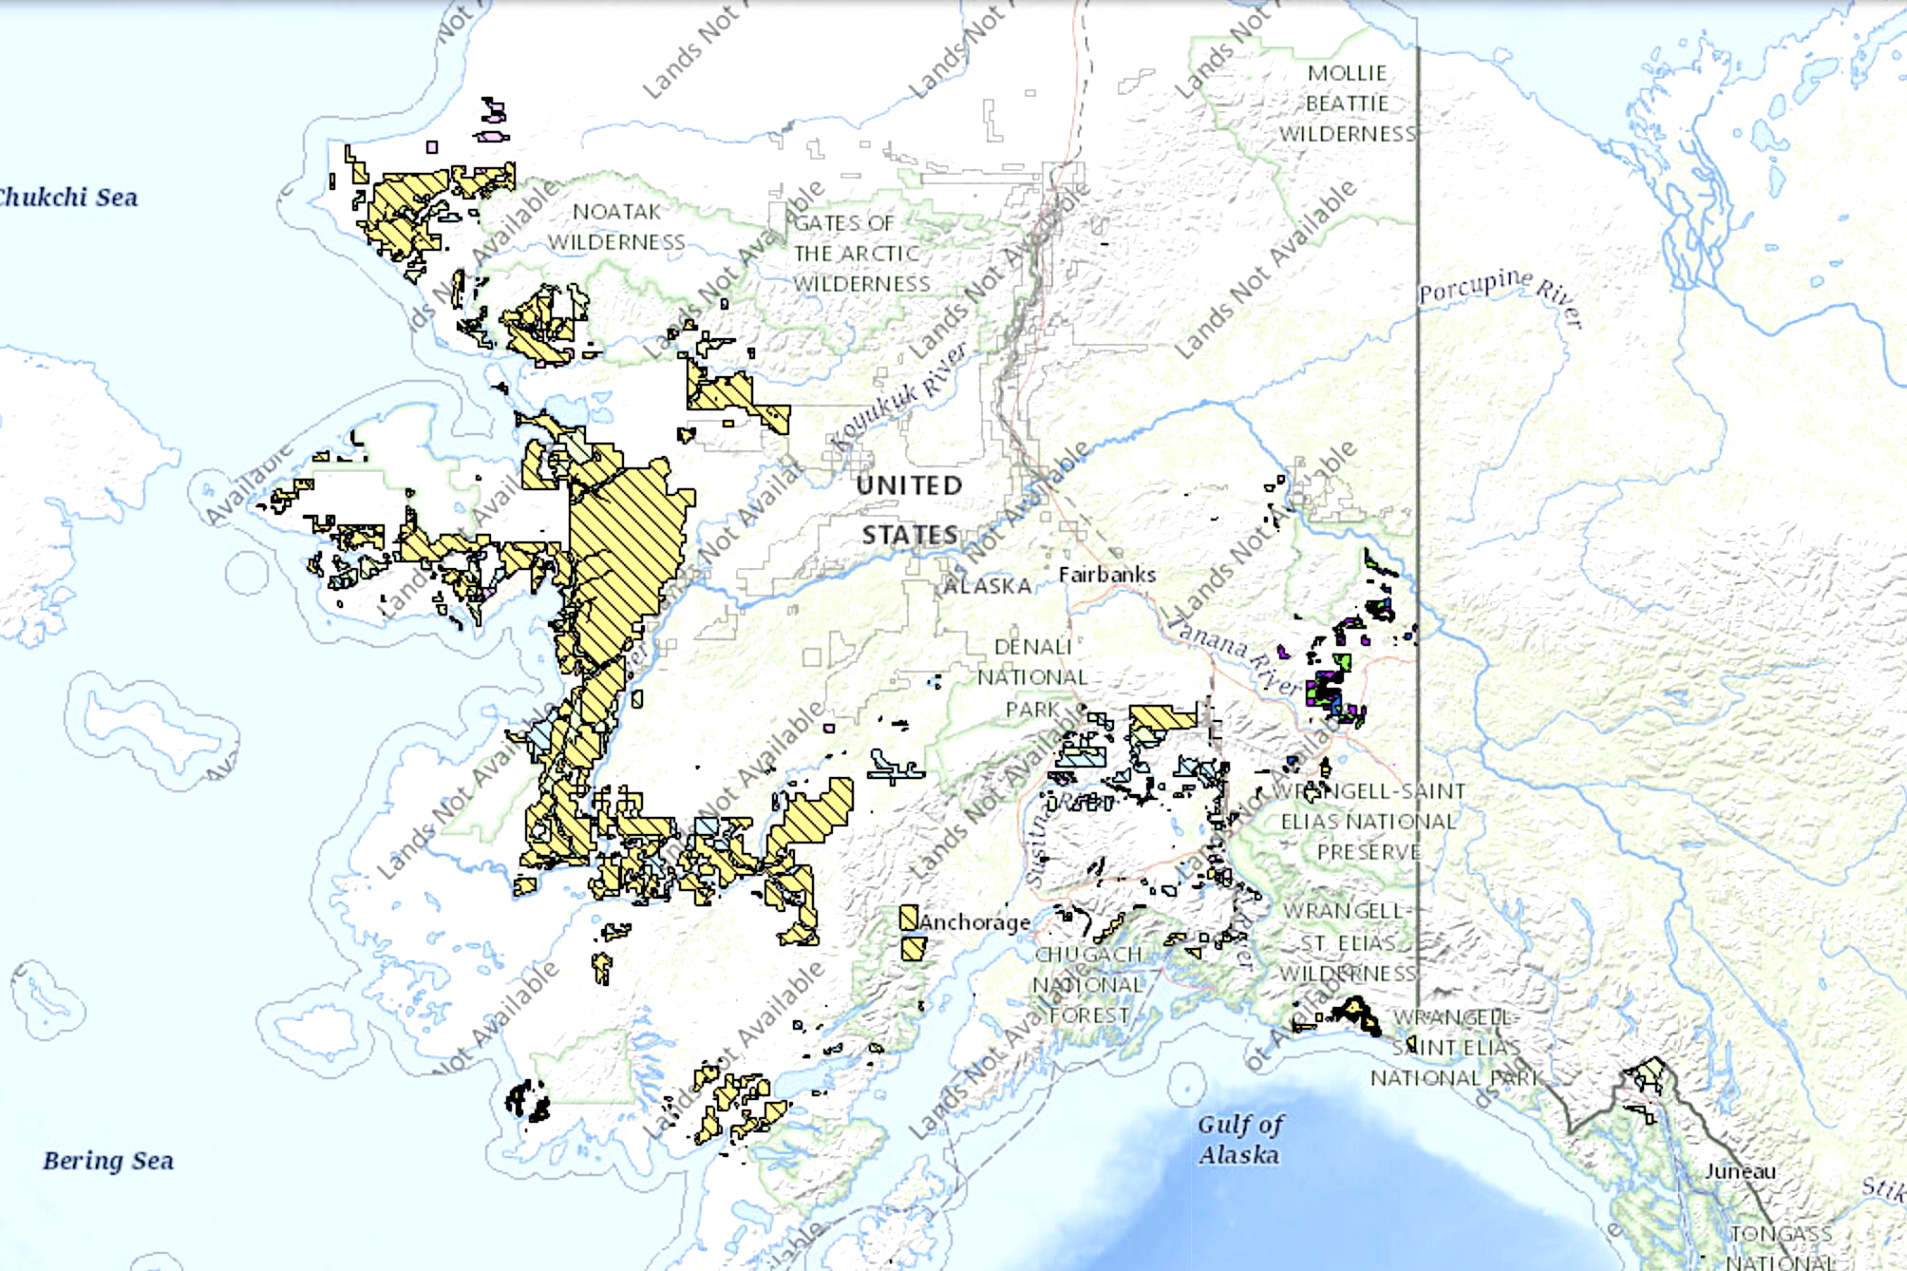 Small Business software In southeast Fairbanks Ak Dans 28m Acres Of Land now Available for Vietnam-era Alaska Native ...